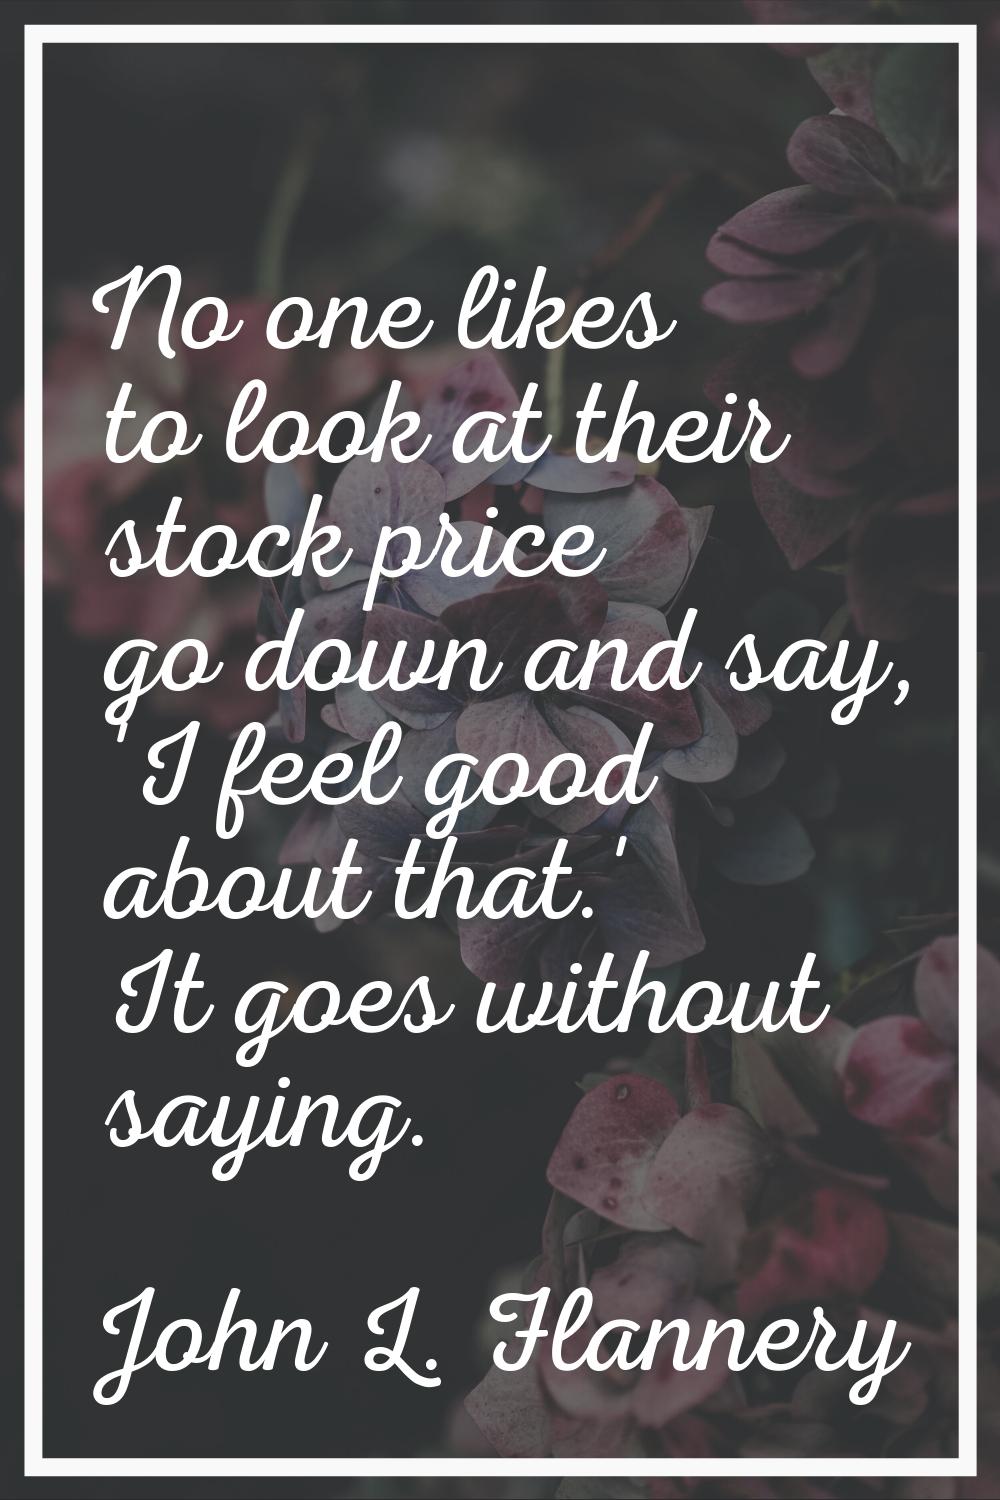 No one likes to look at their stock price go down and say, 'I feel good about that.' It goes withou